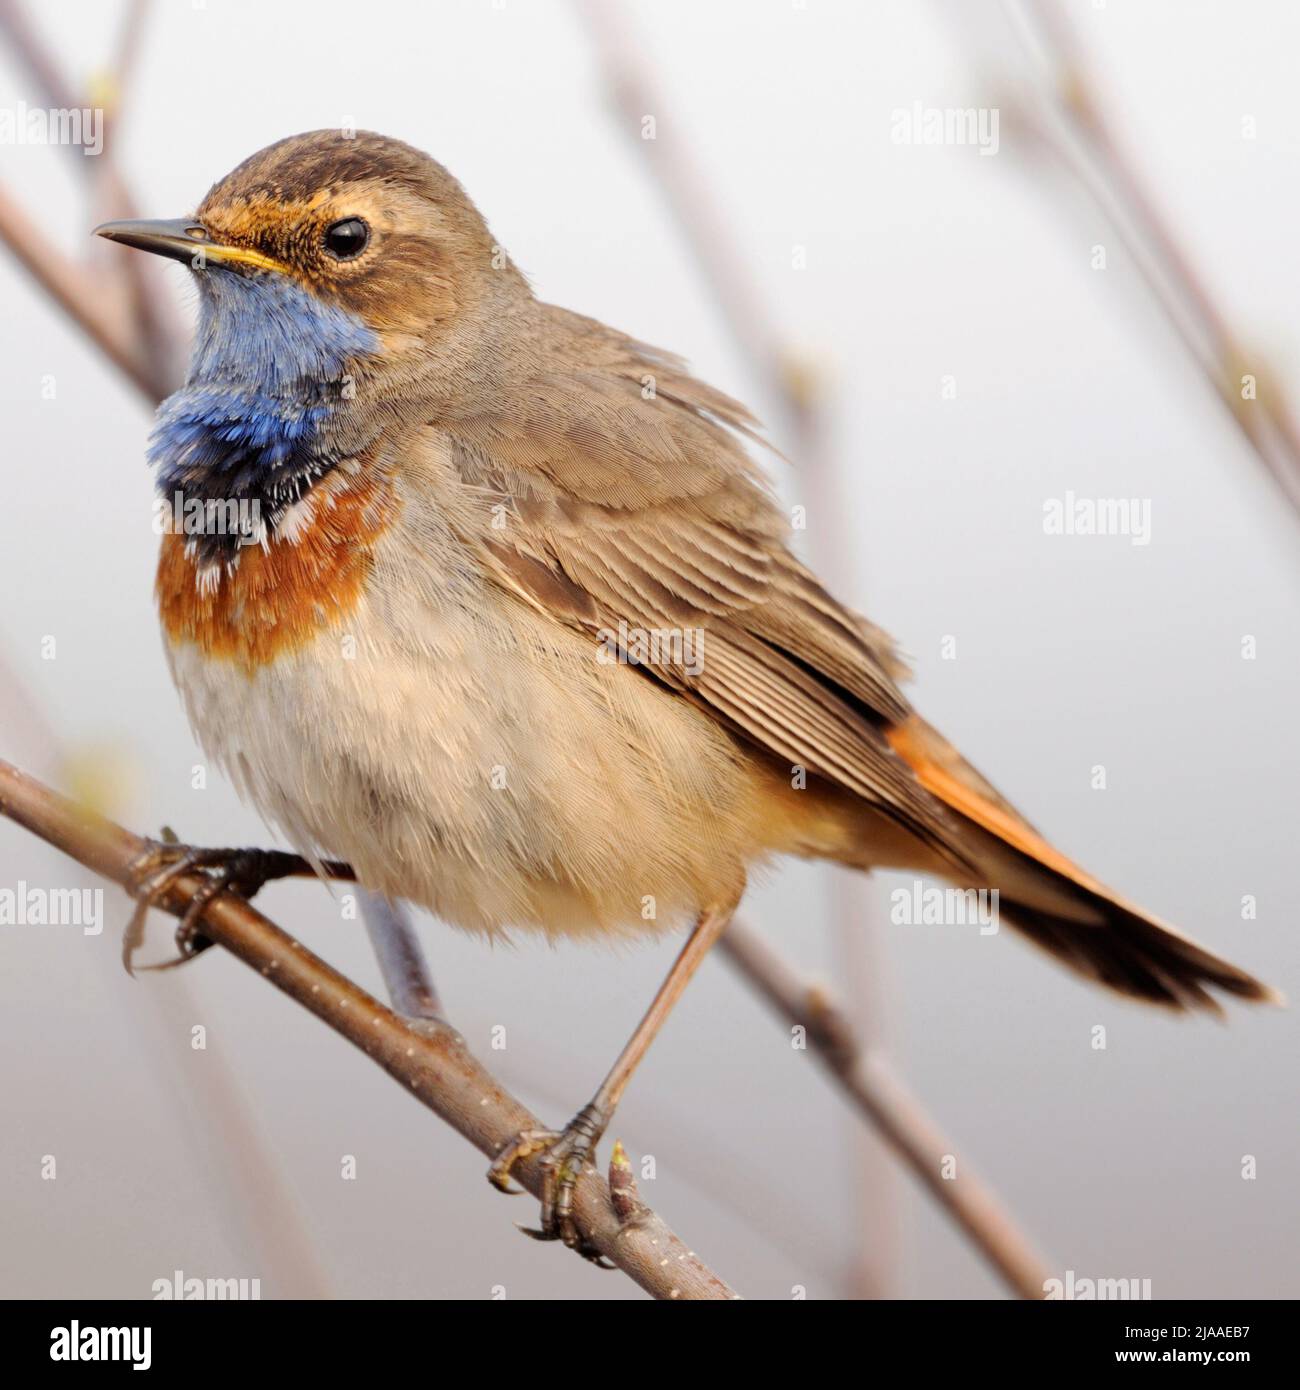 White-spotted Bluethroat / Blaukehlchen ( Luscinia svecica ) perched on a branch, natural surrounding, typical view, endangered species, Europe. Stock Photo